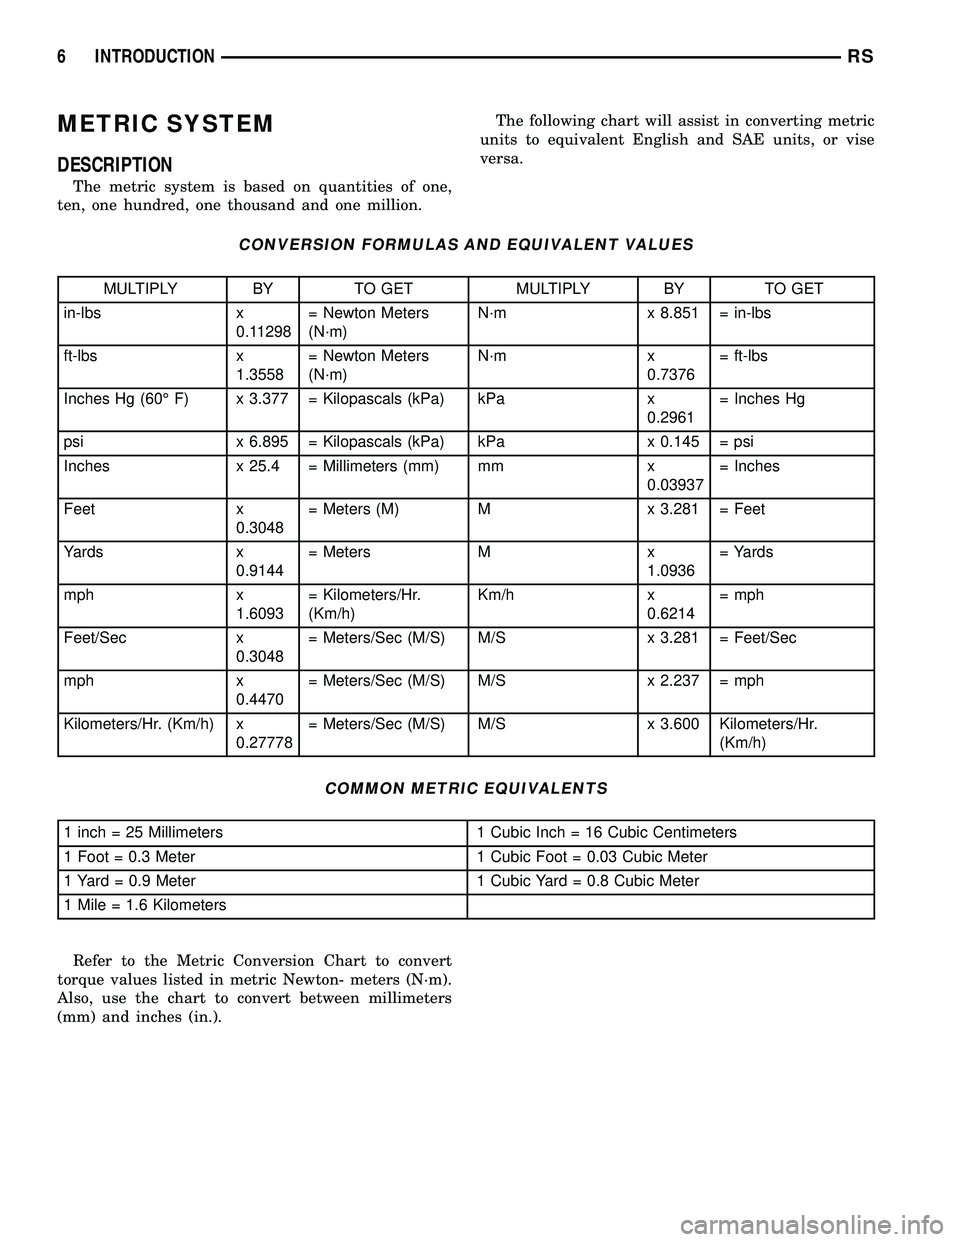 CHRYSLER CARAVAN 2005  Service Manual METRIC SYSTEM
DESCRIPTION
The metric system is based on quantities of one,
ten, one hundred, one thousand and one million.The following chart will assist in converting metric
units to equivalent Engli